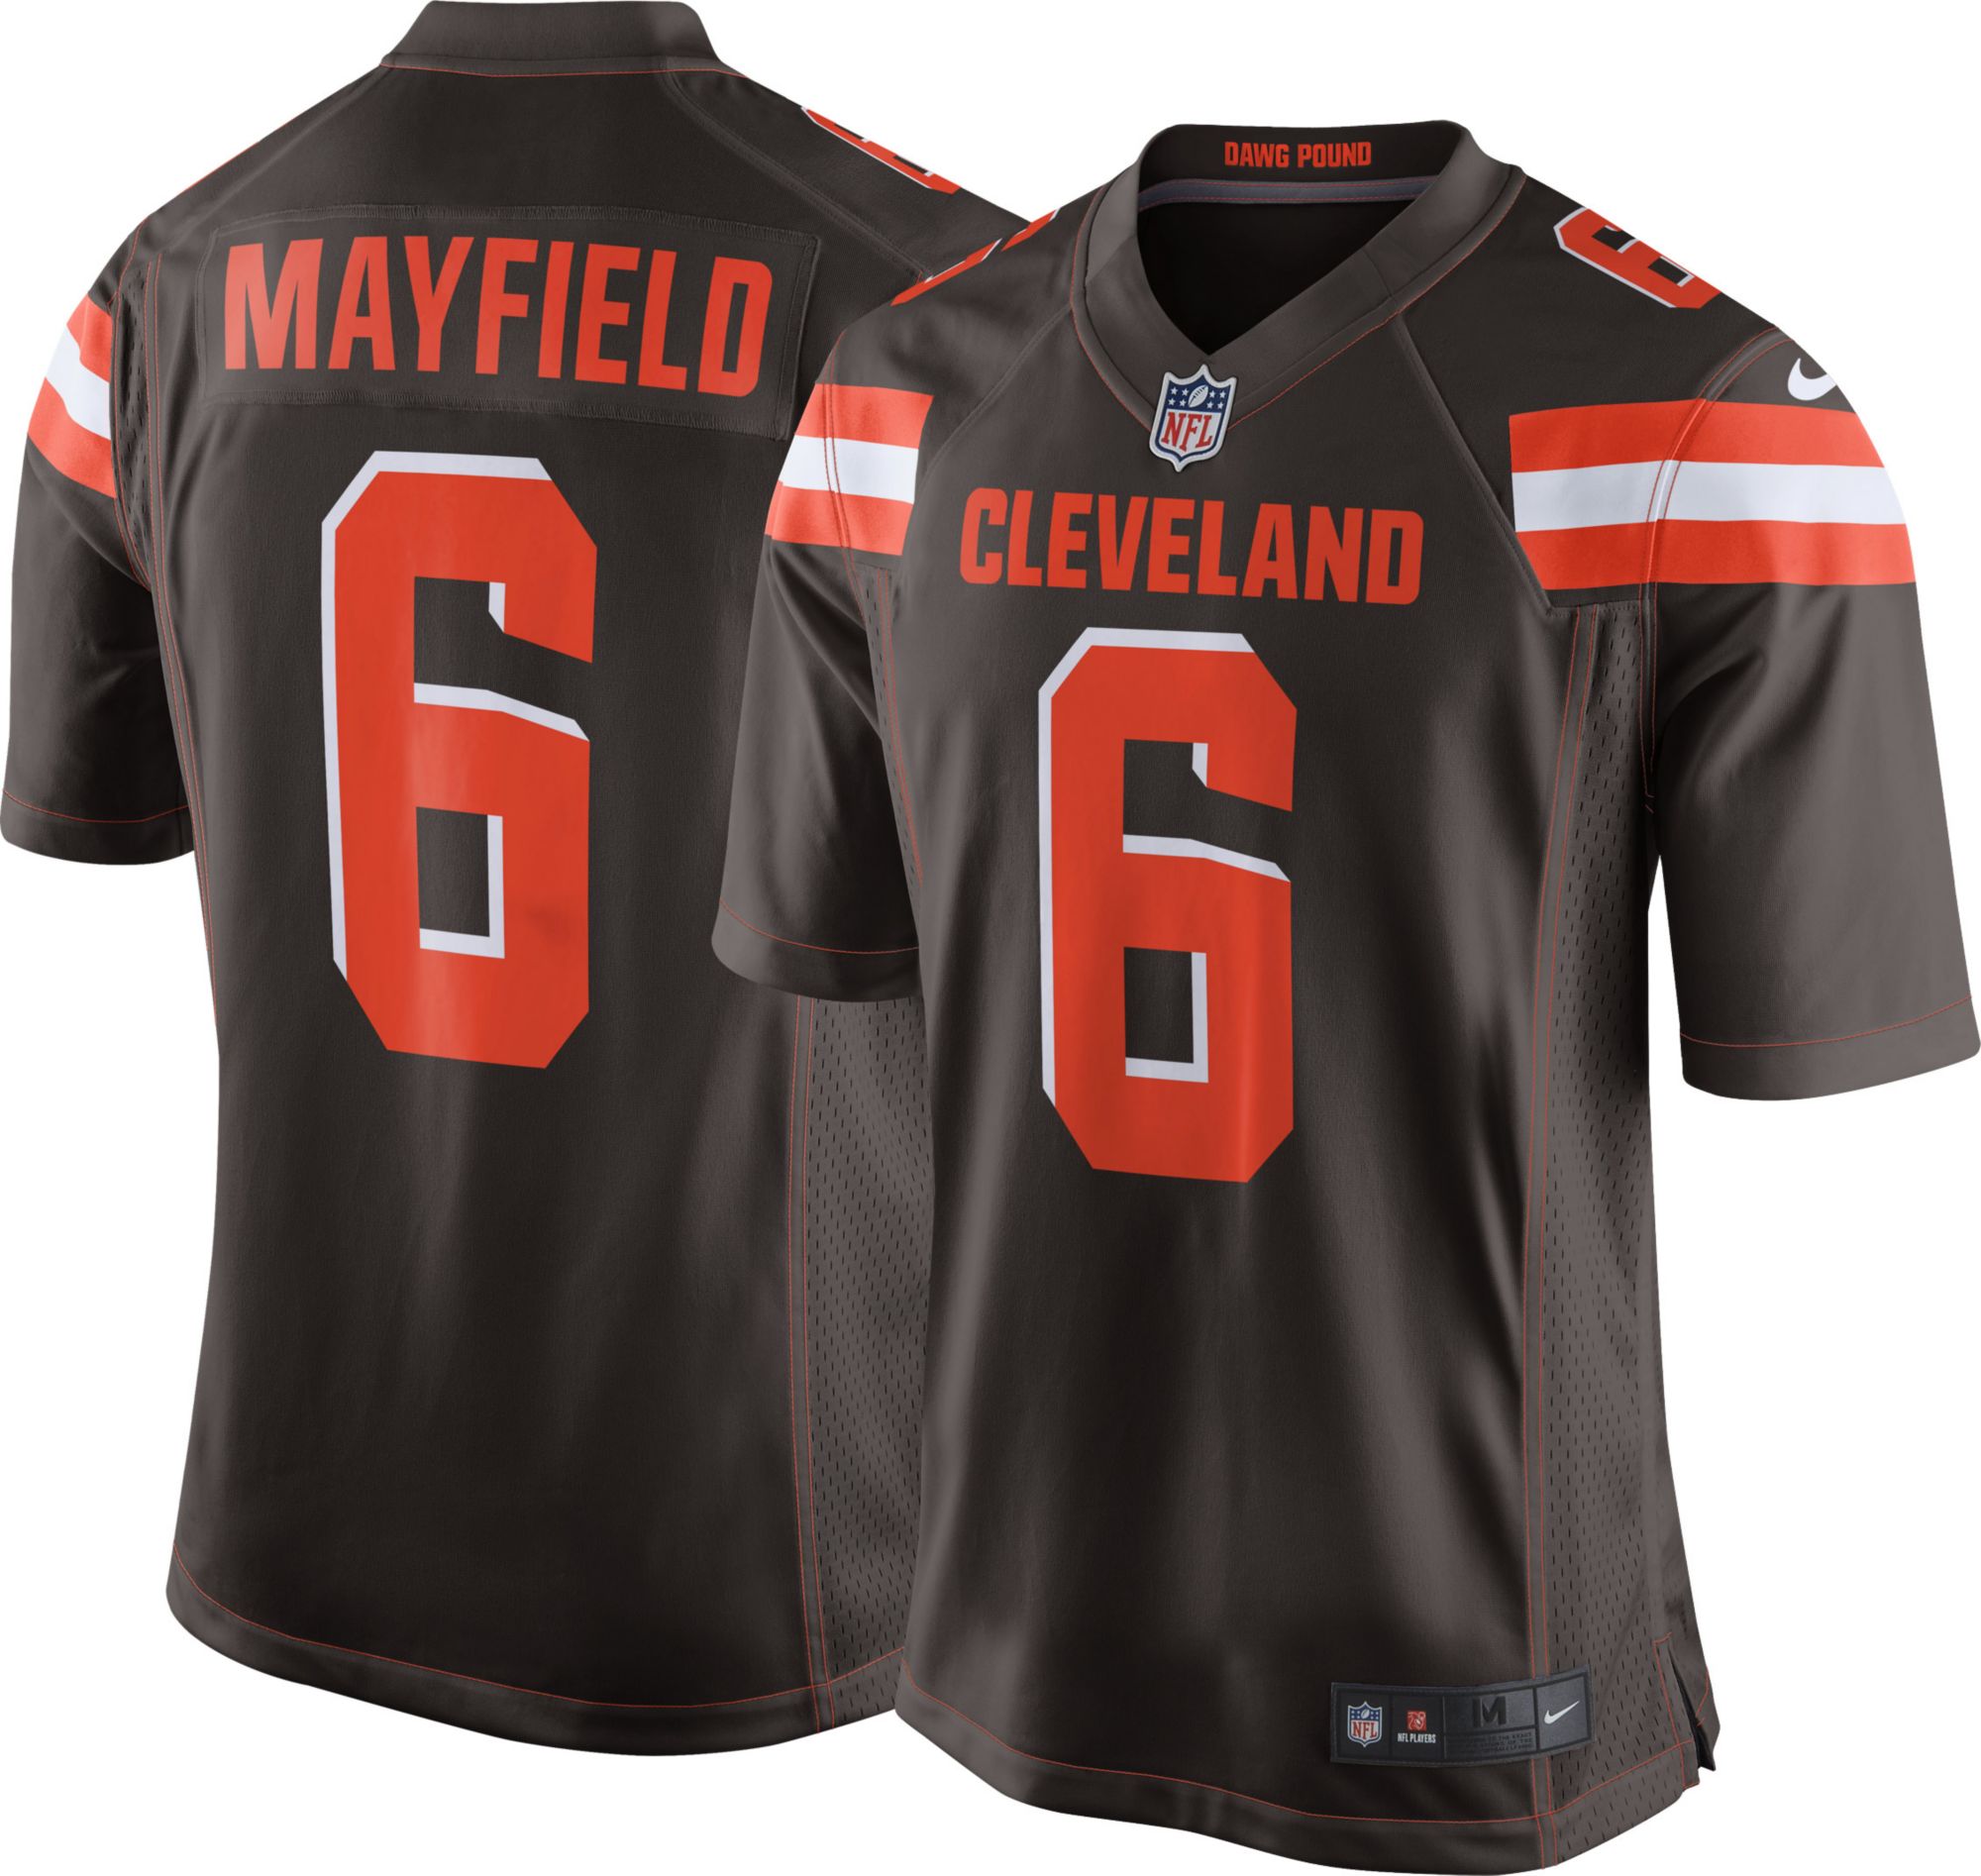 baker mayfield browns jersey signed